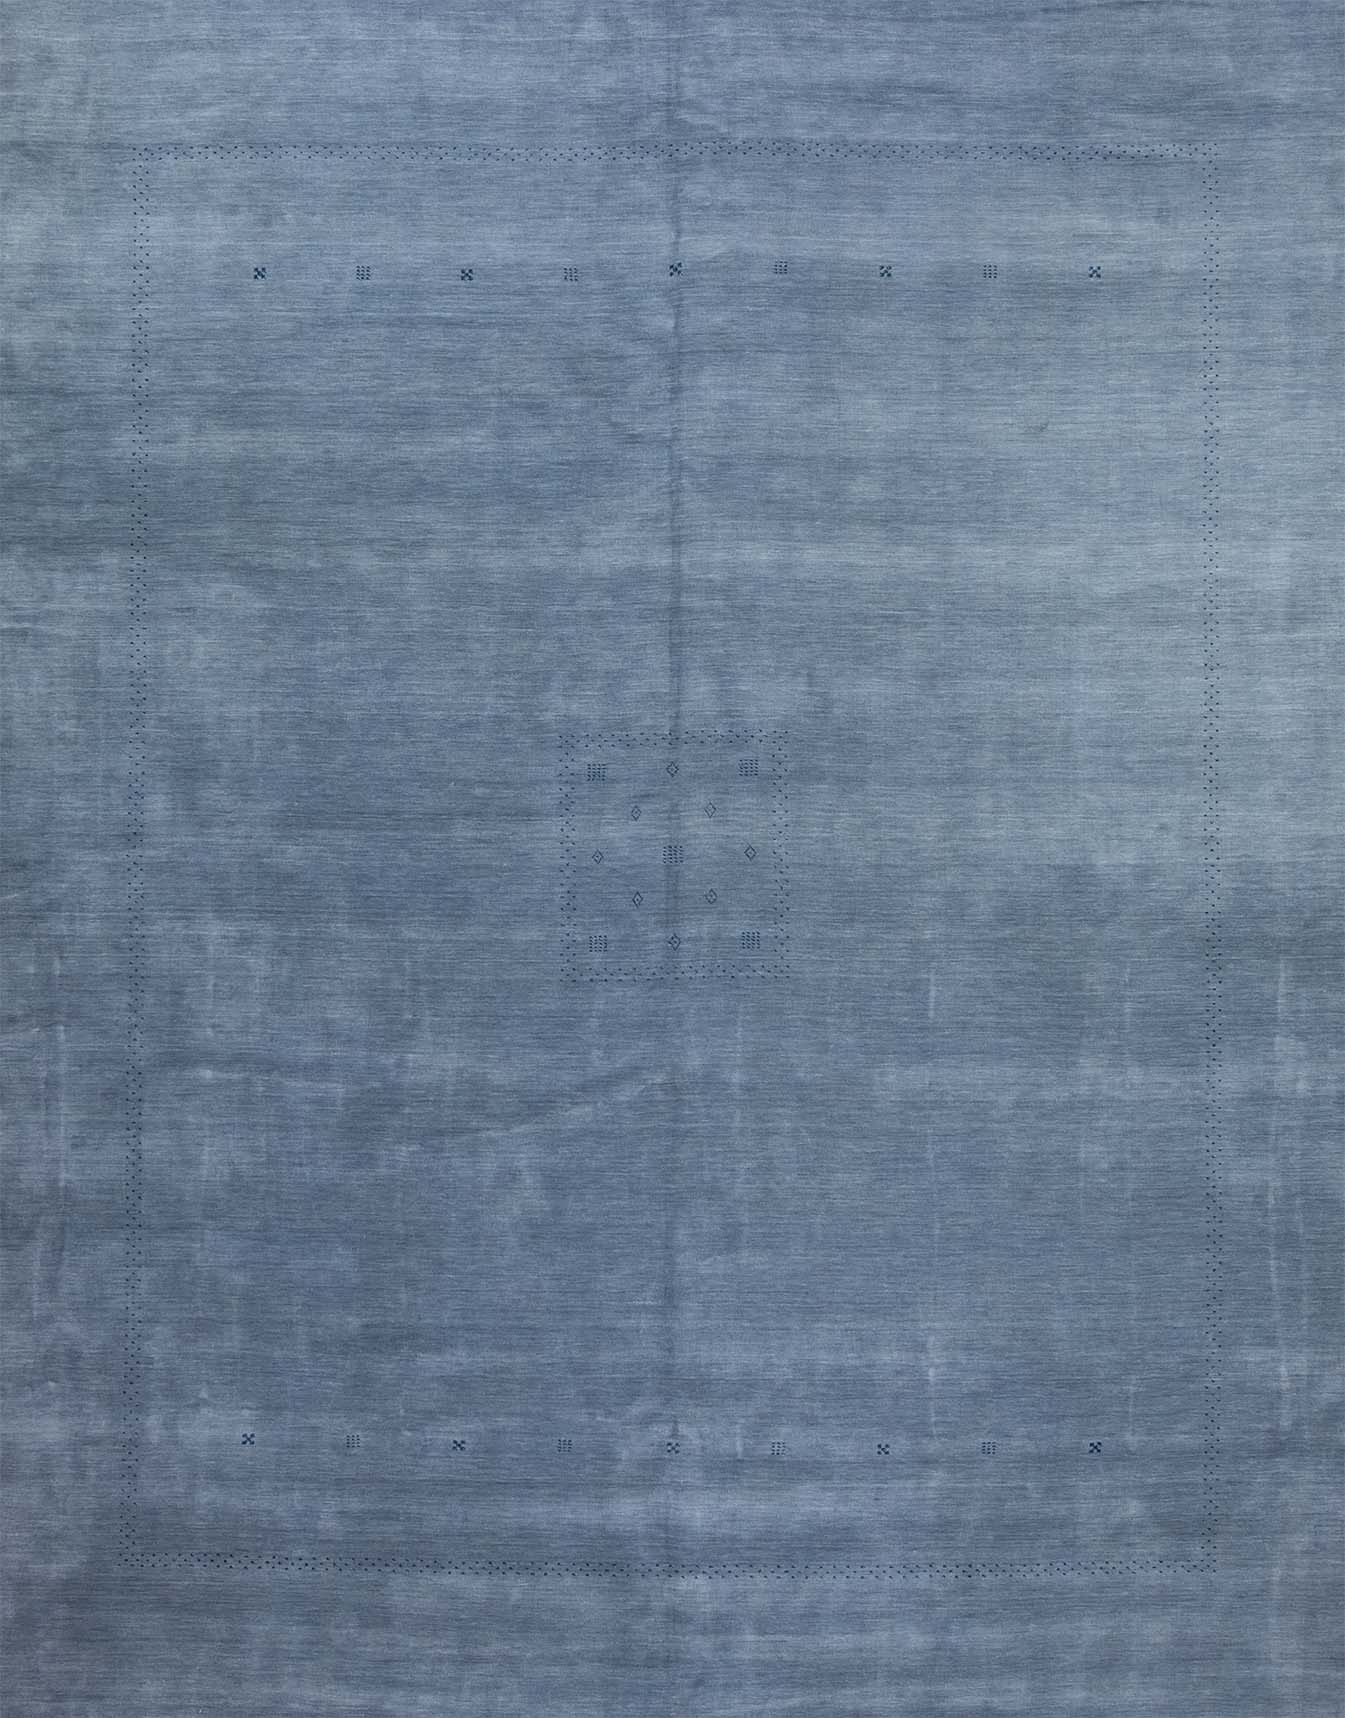 Big Rugs for large living spaces. Gray color contemporary loomed rug made of wool. Rug size 12.2x14.7.